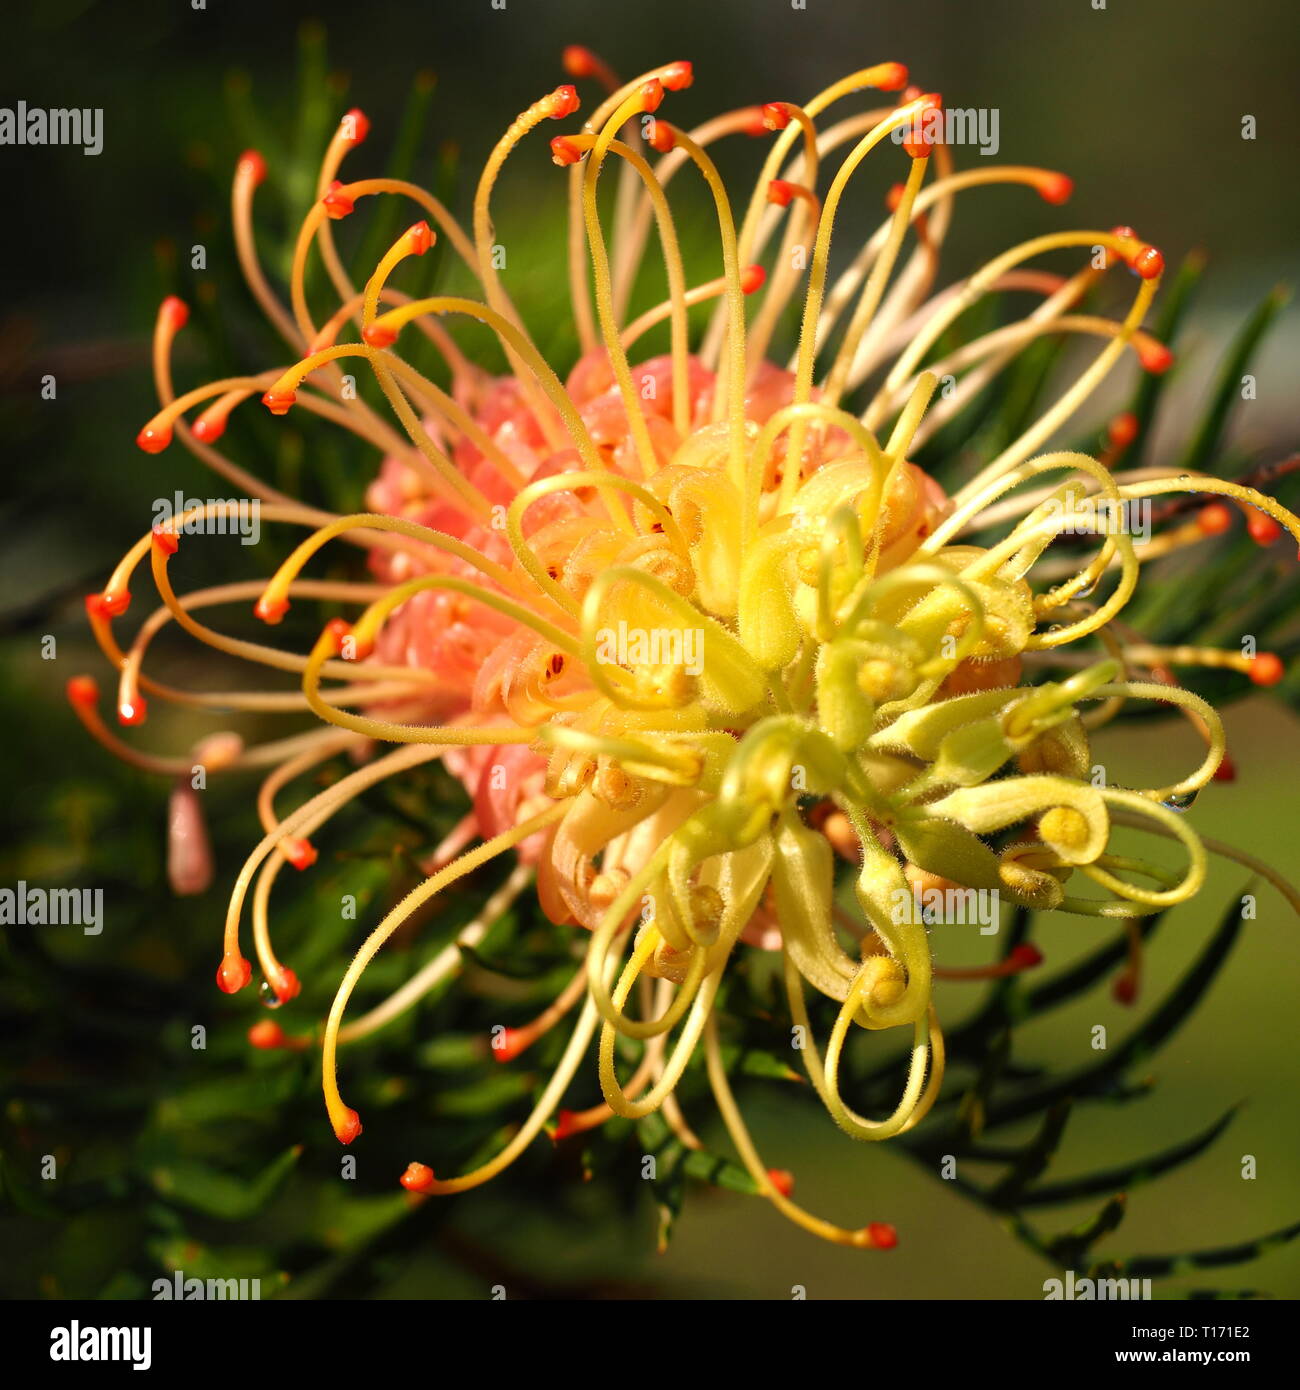 Grevillea flowers. Yellow and pink petals of the Australian native Grevillea plant in flower. Wild birds are attracted to these flowers. Stock Photo